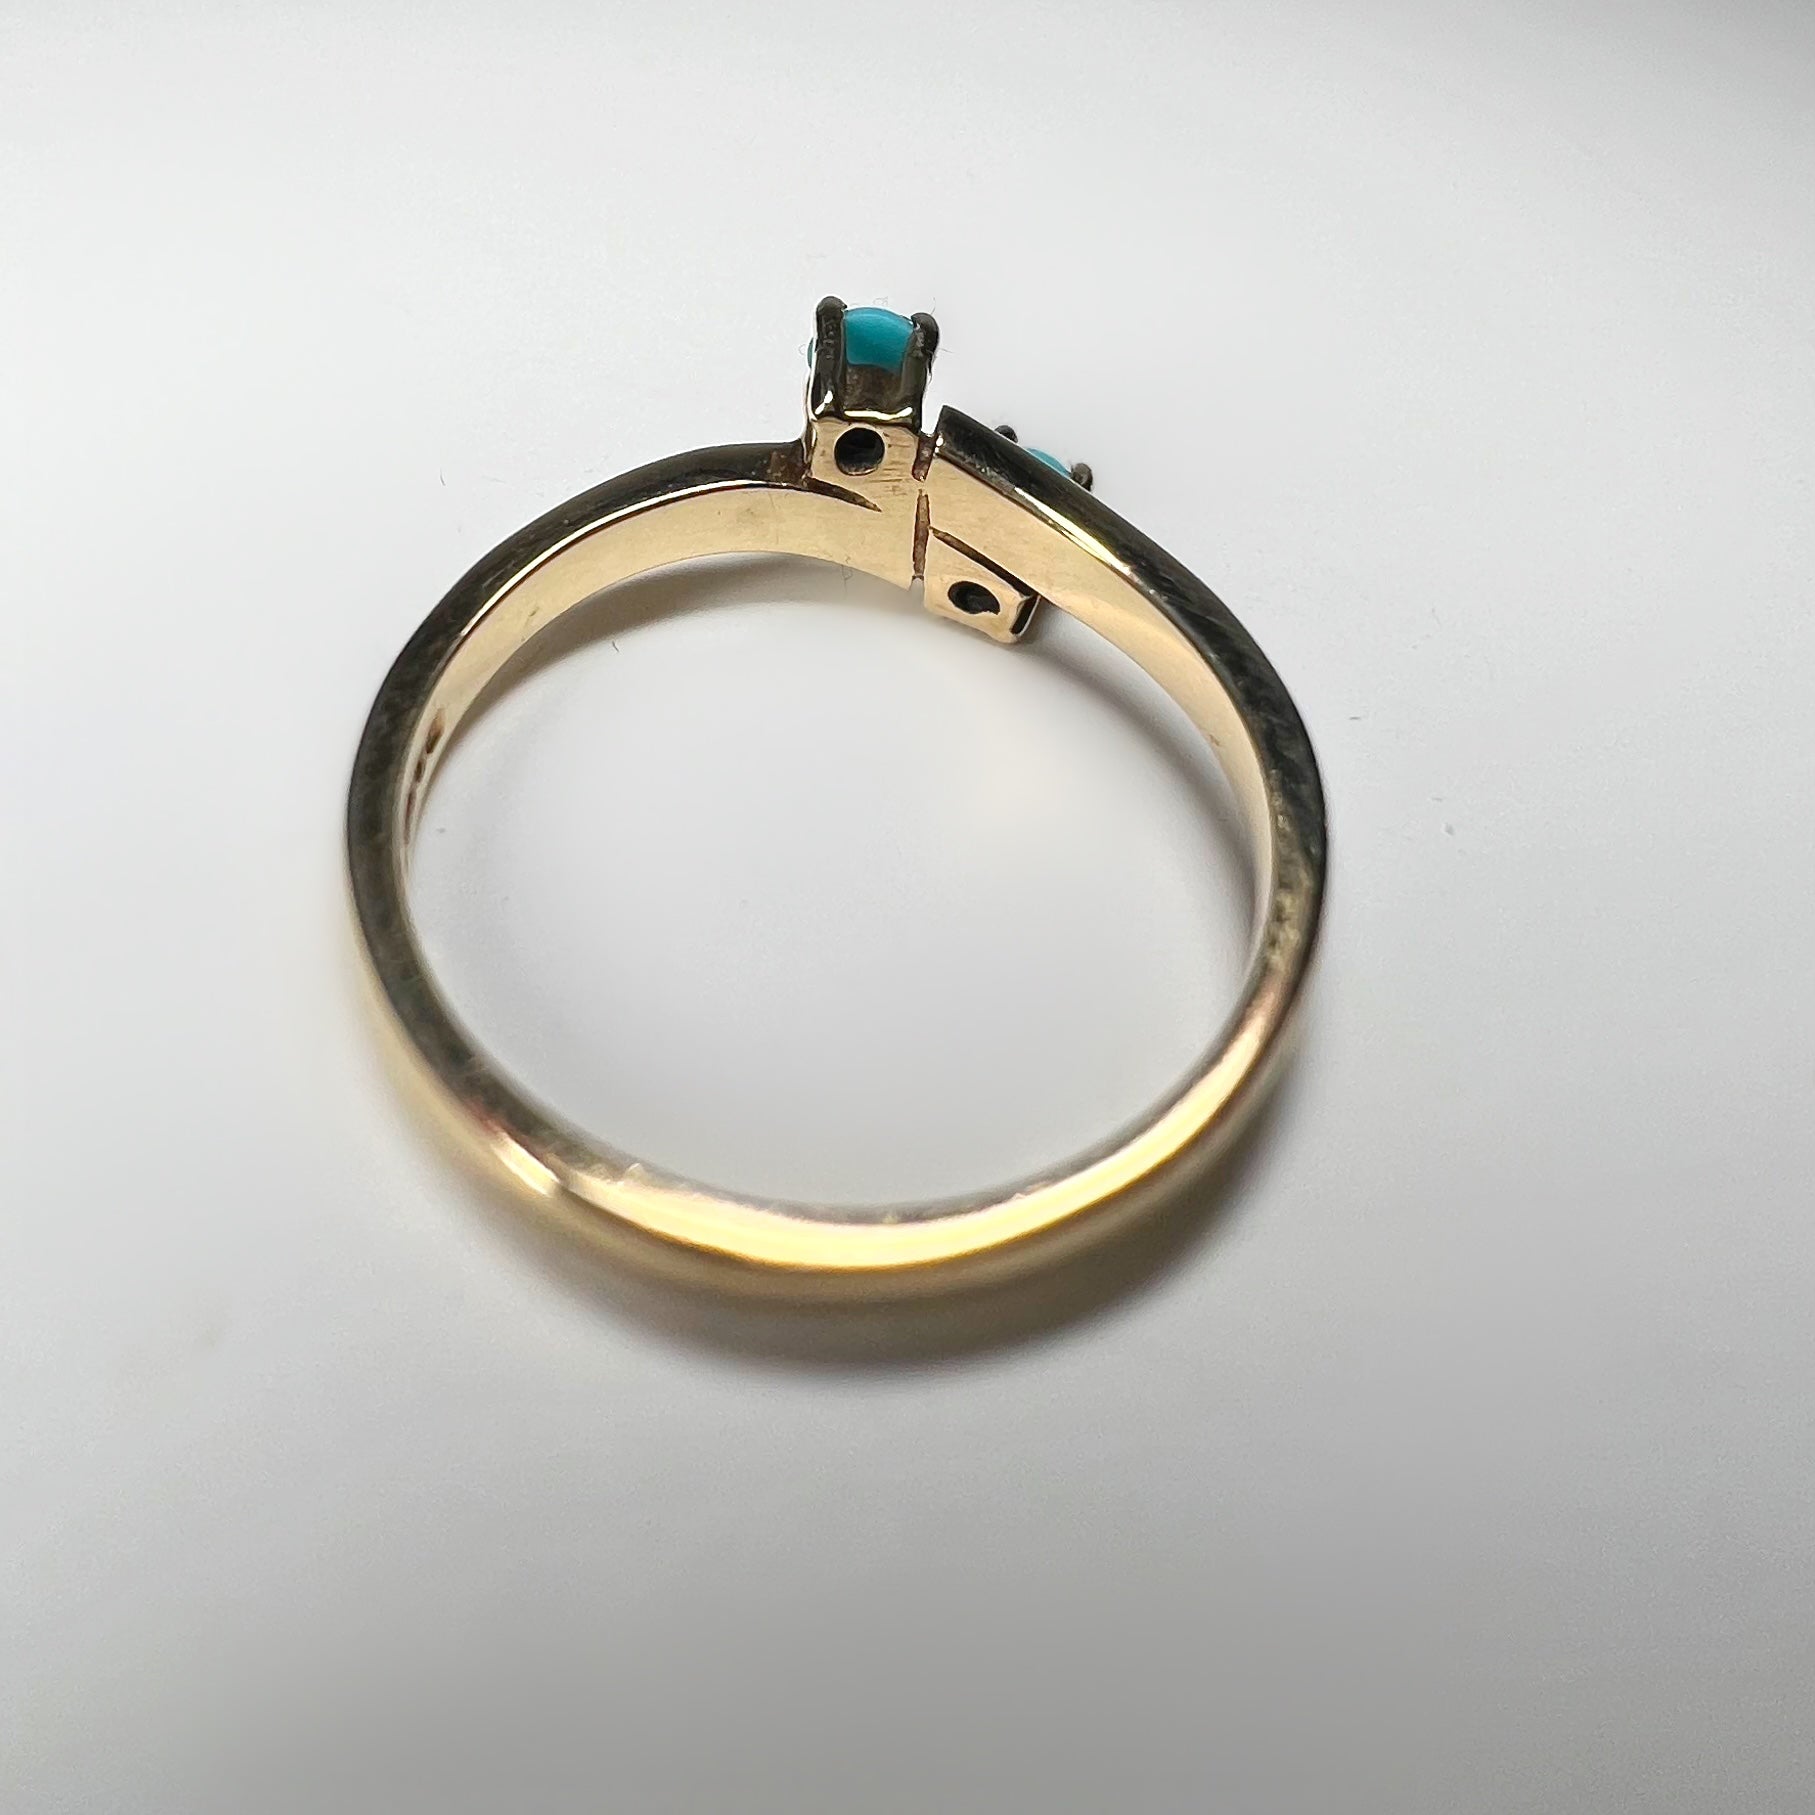 Vintage Turquoise Cross Over Ring